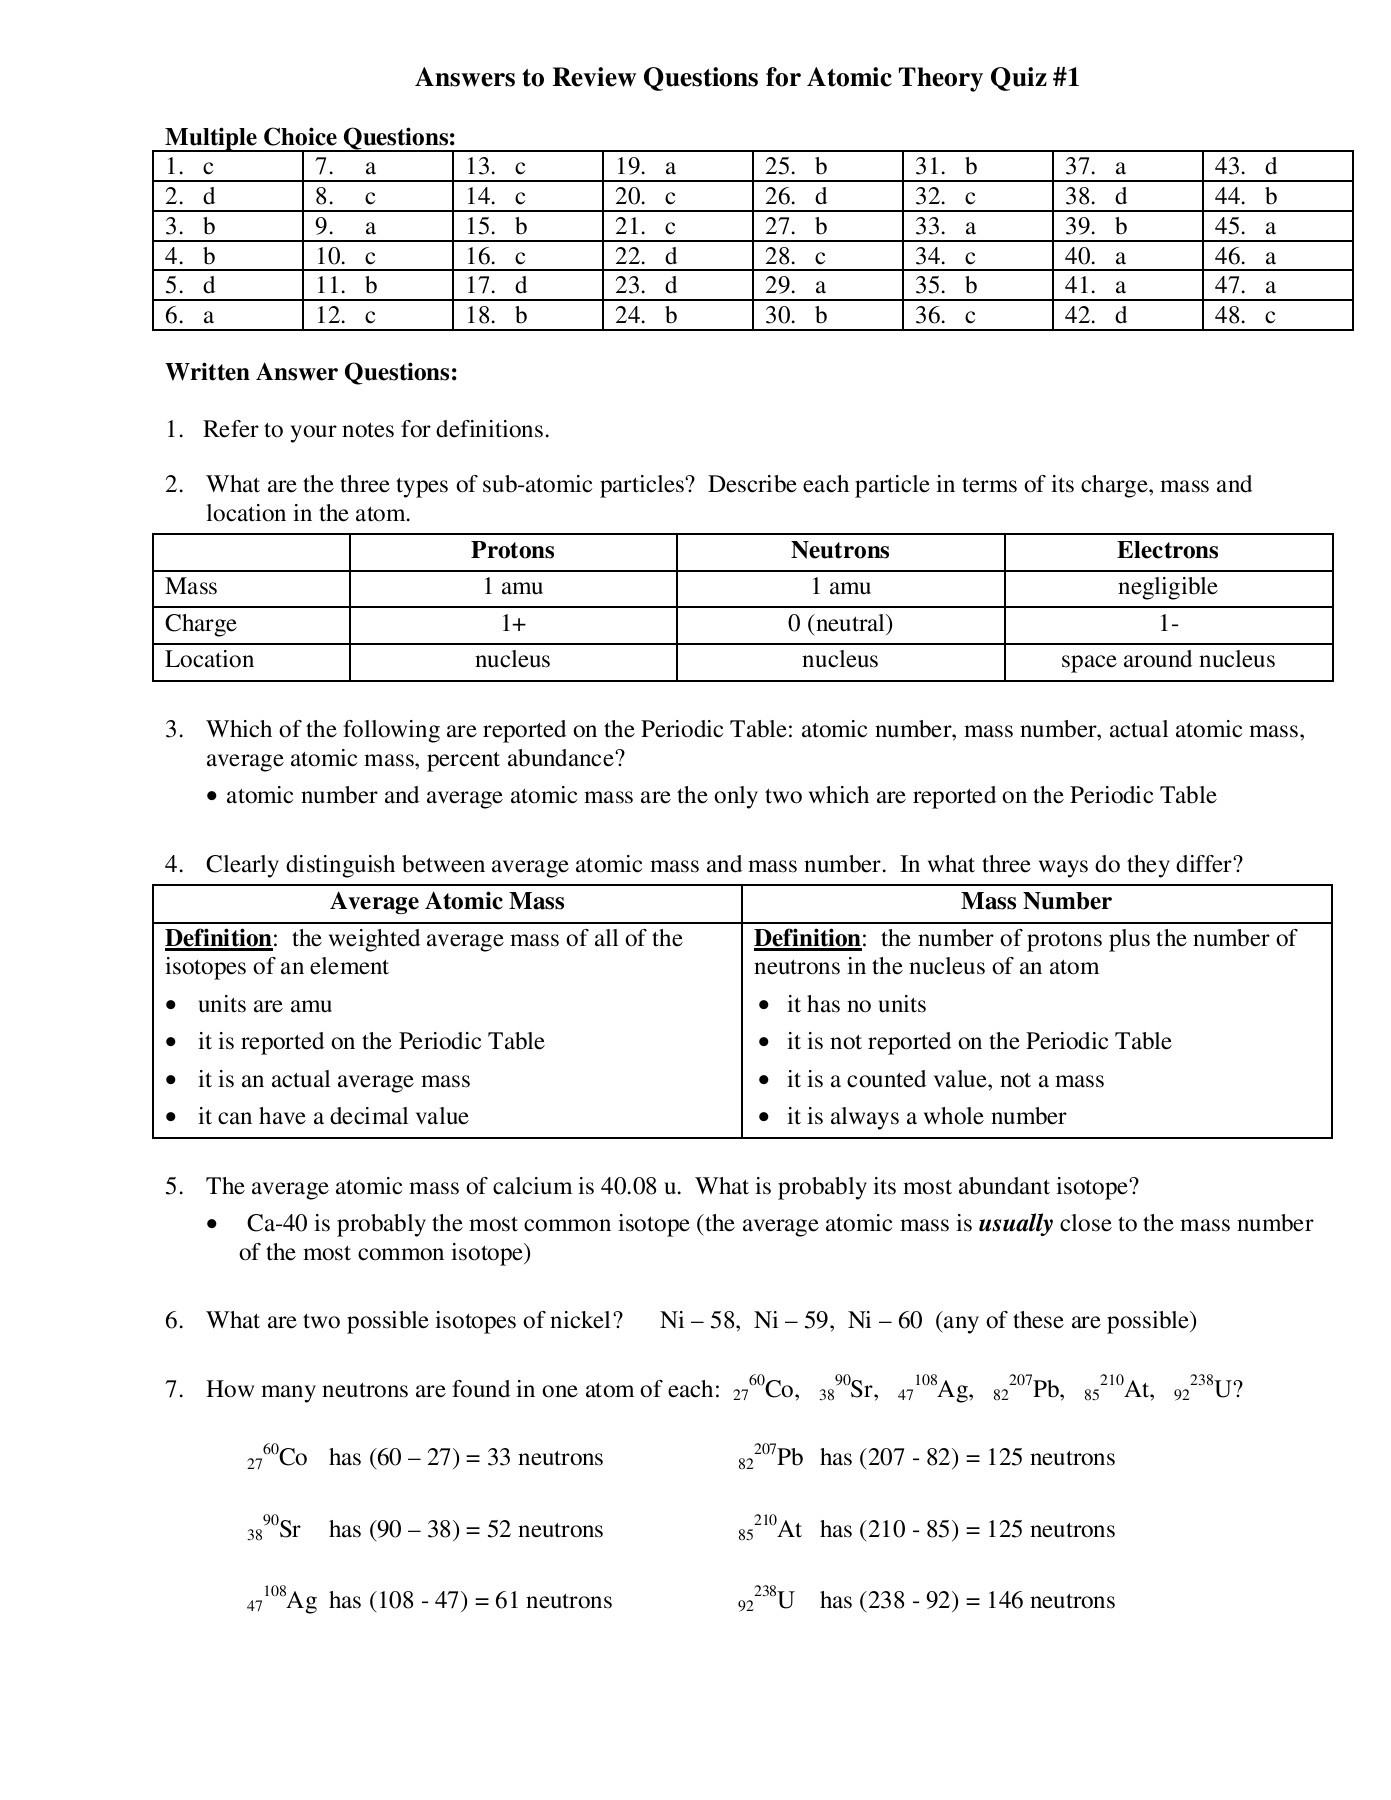 Development Of atomic theory Worksheet Answers to Review Questions for atomic theory Quiz 1 Pages